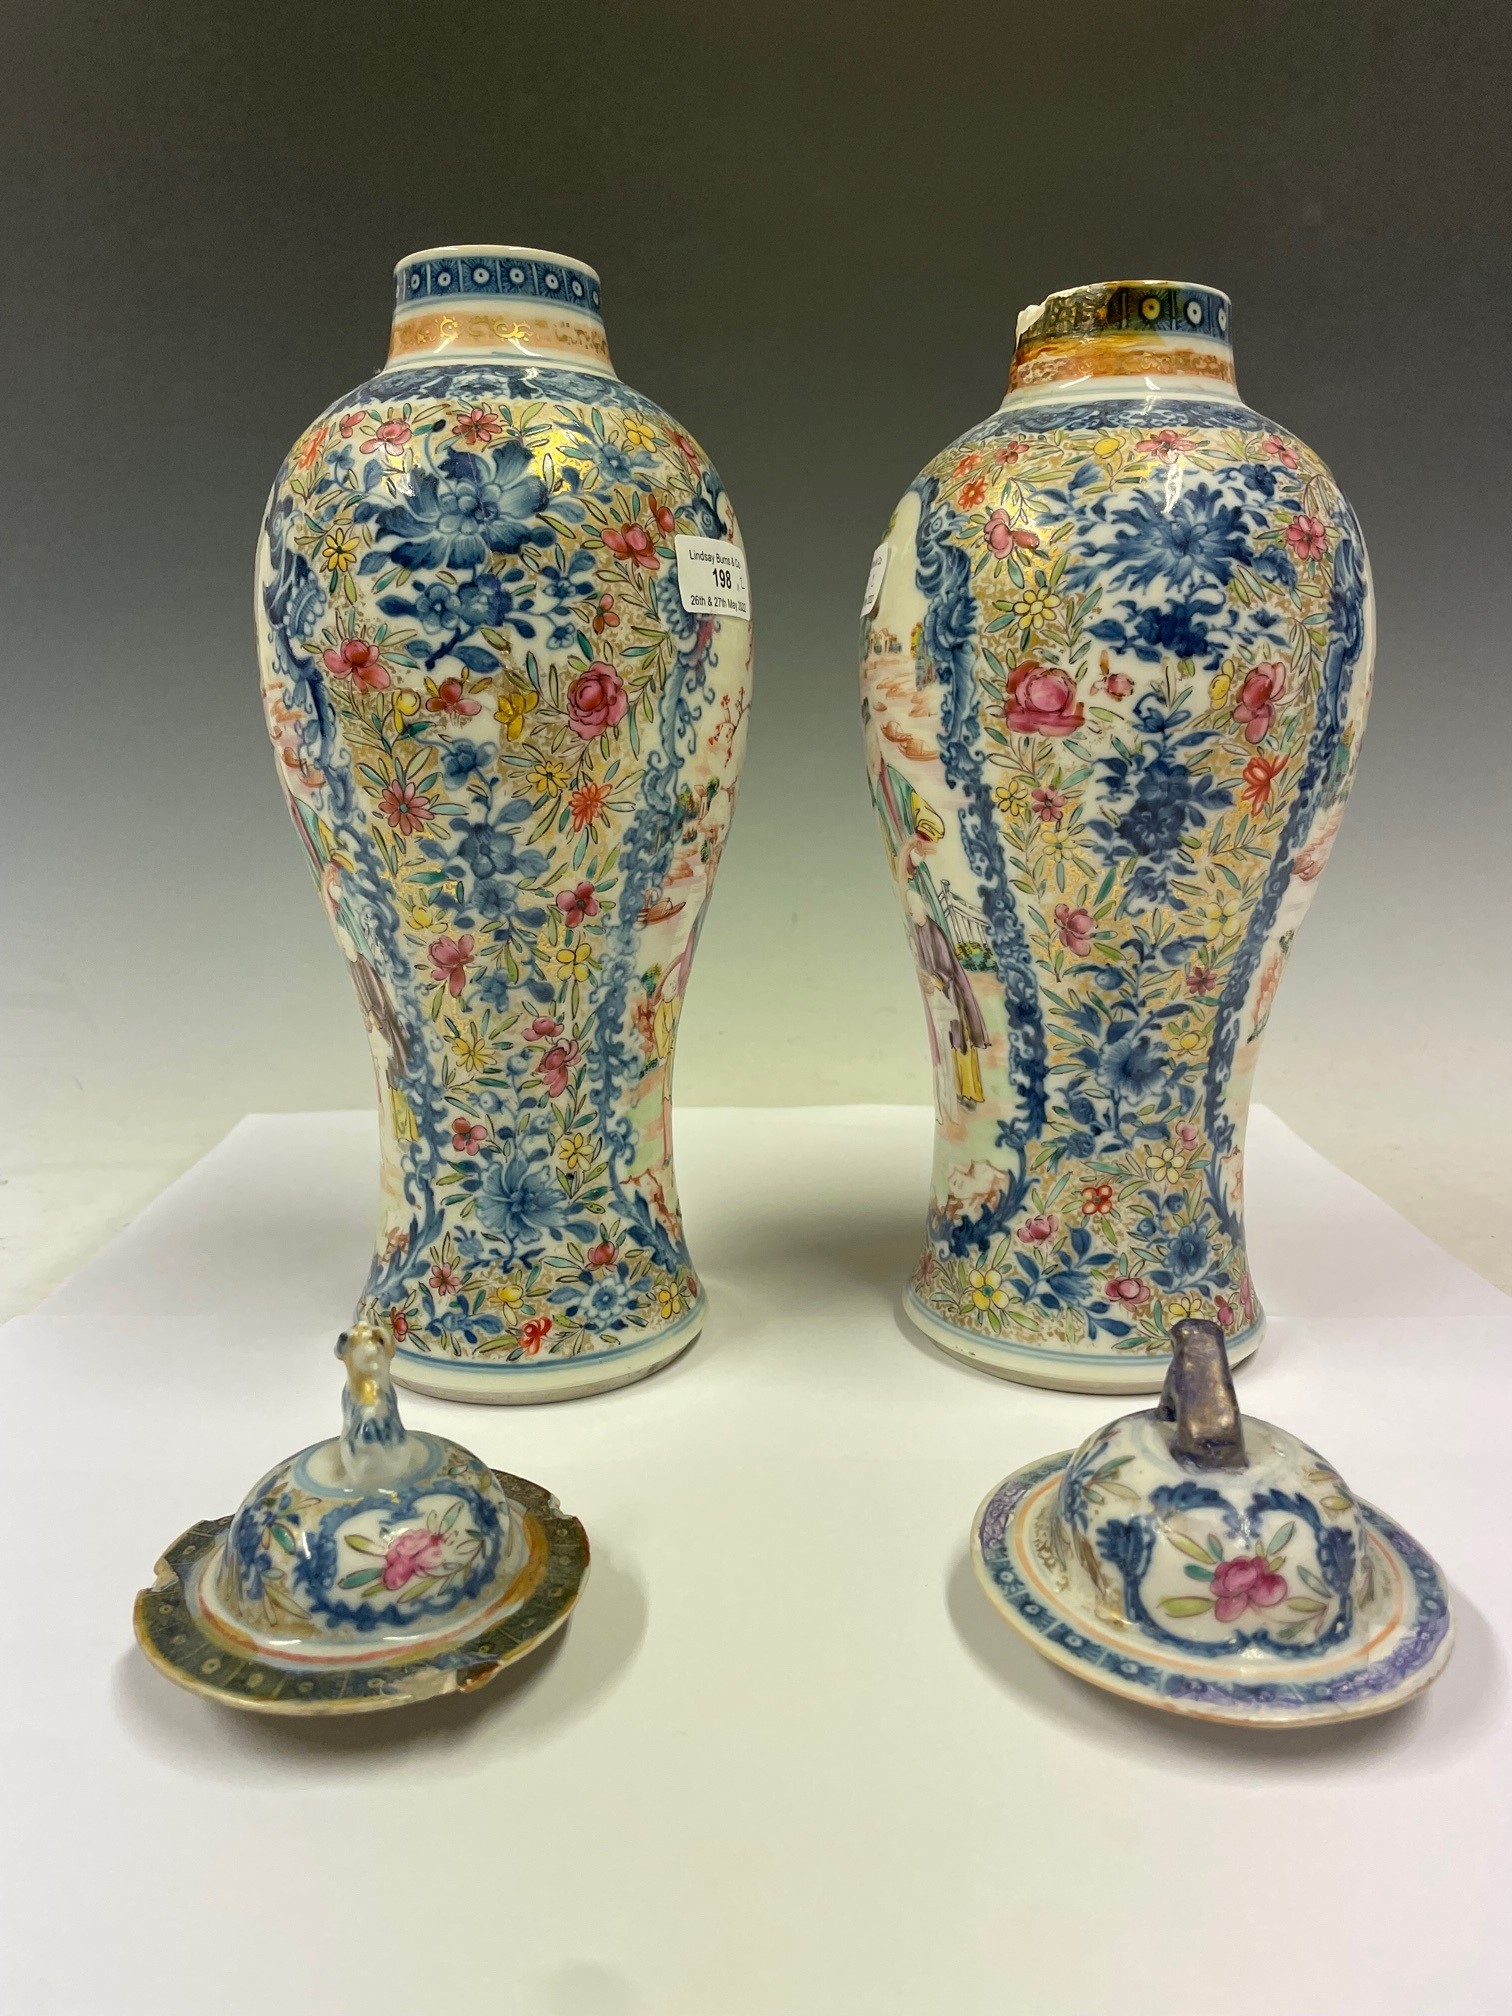 A PAIR OF CHINESE PORCELAIN BLUE AND WHITE JARS AND COVERS, QING DYNASTY, WITH FAMILLE ROSE ENAMEL - Image 3 of 7